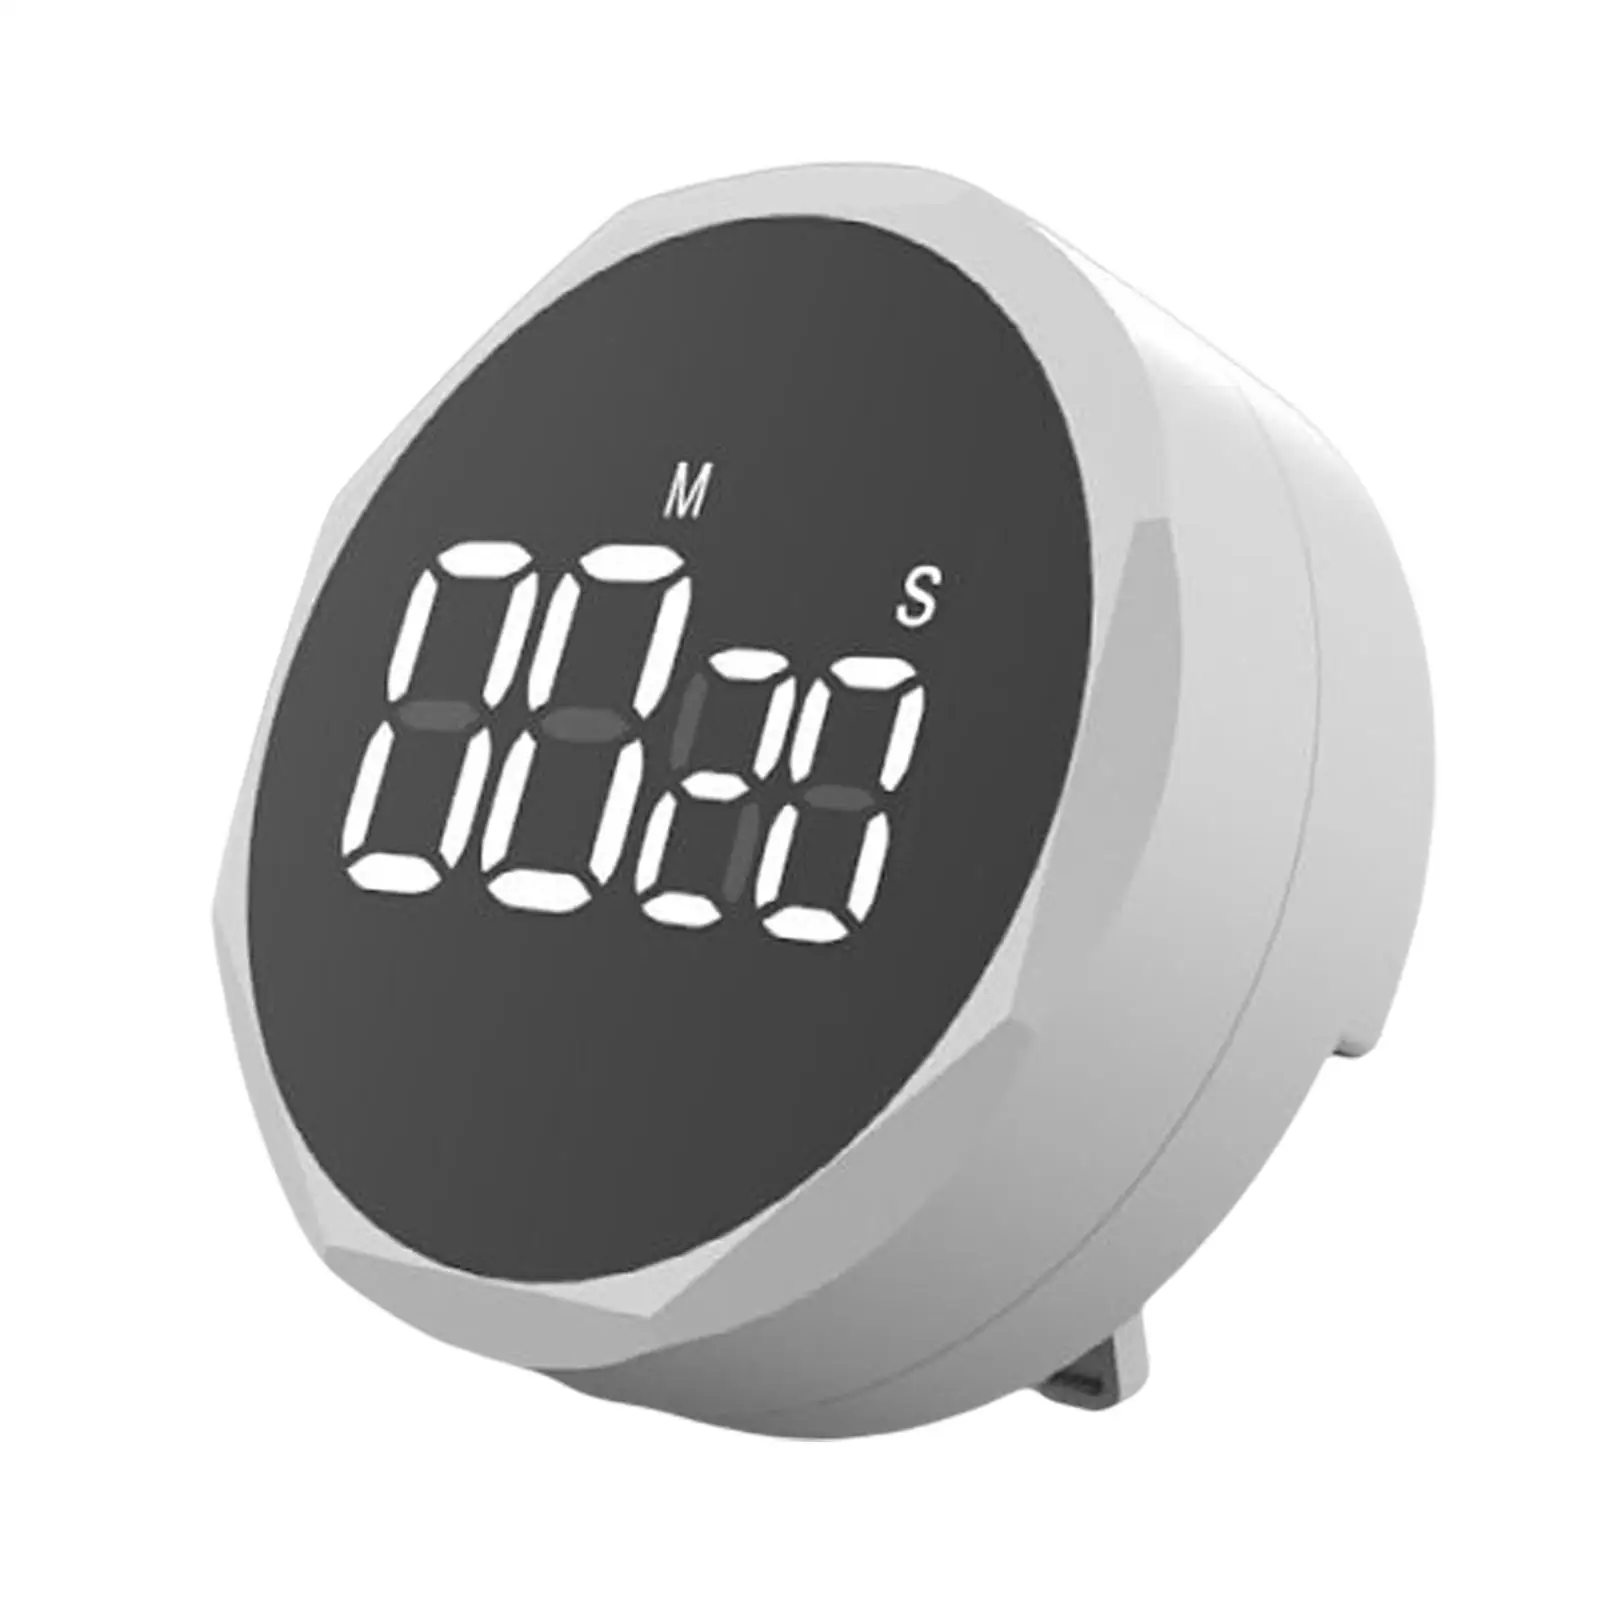 Kitchen Timer Adjustable Reminder LCD Display Time Management Motion timers for Baking Cooking Barbecue Classroom Seniors